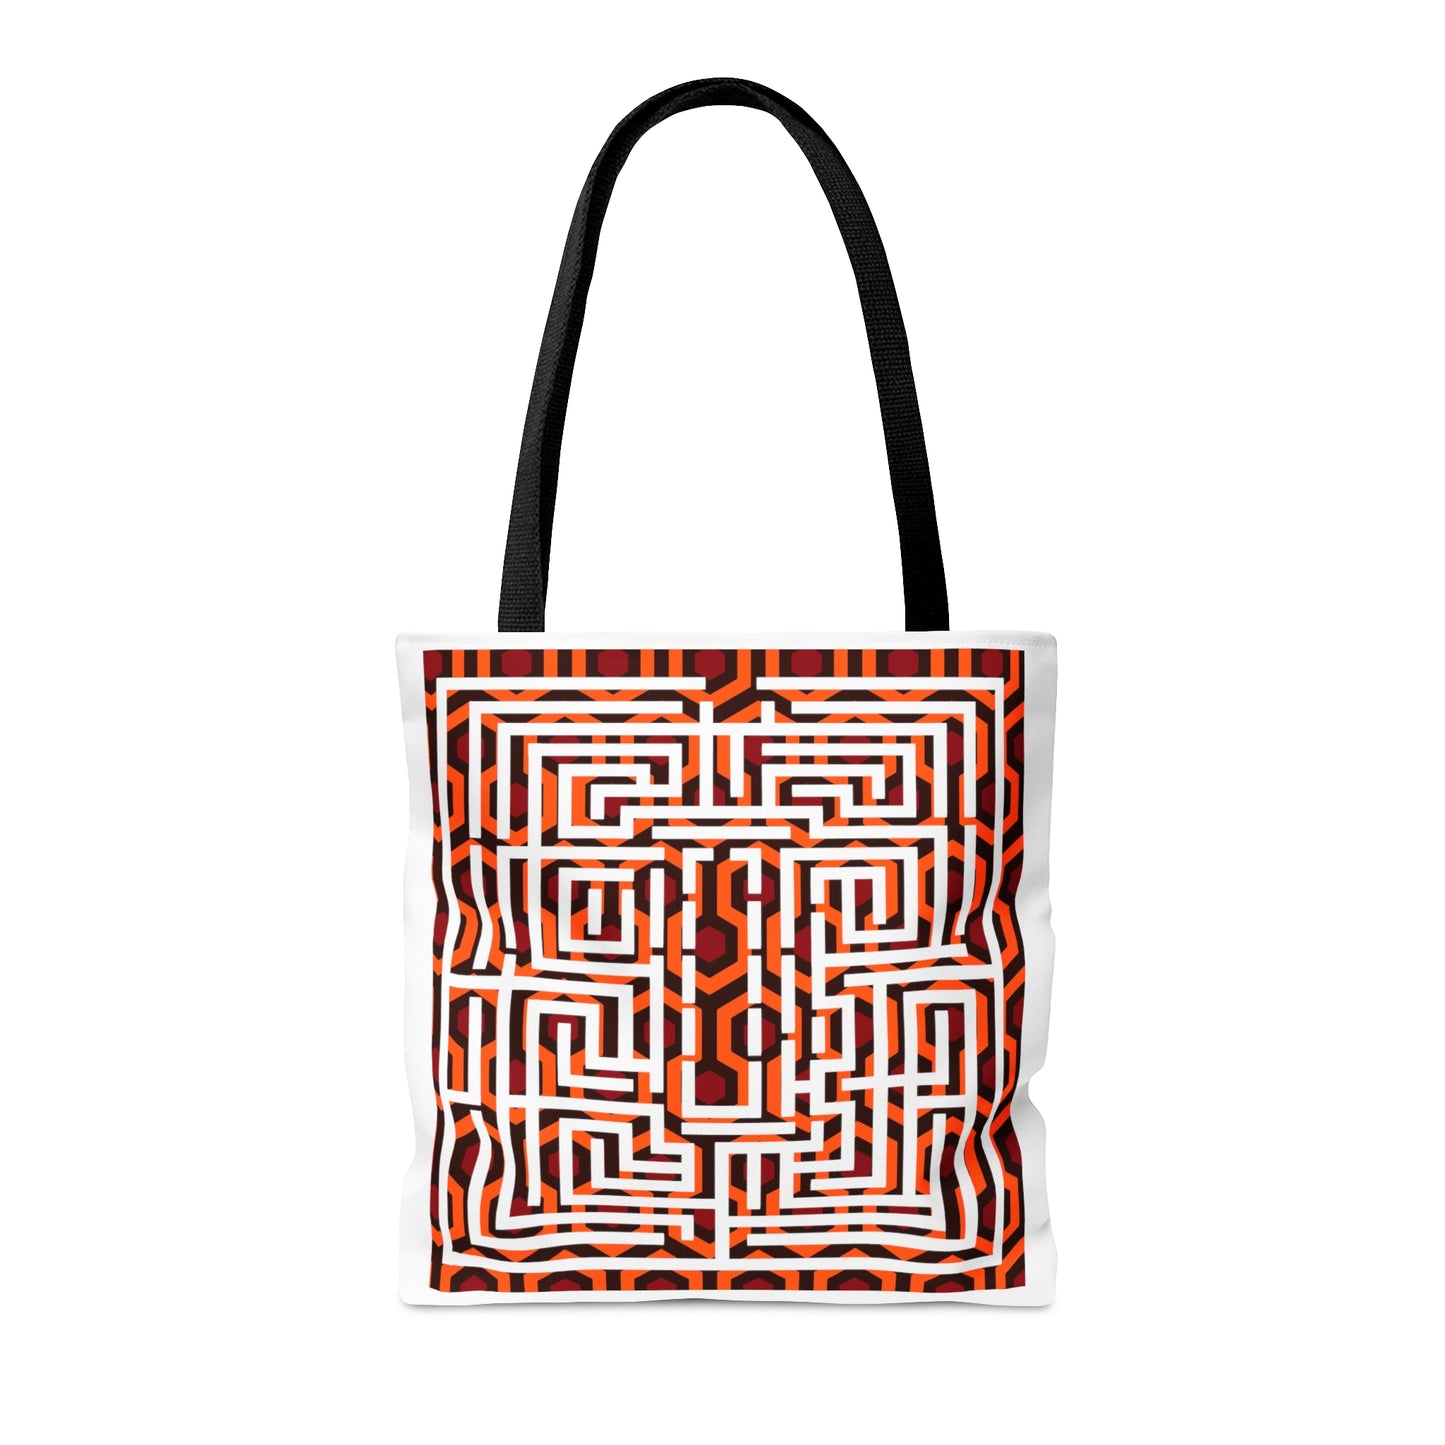 The Overlook Tote Bag